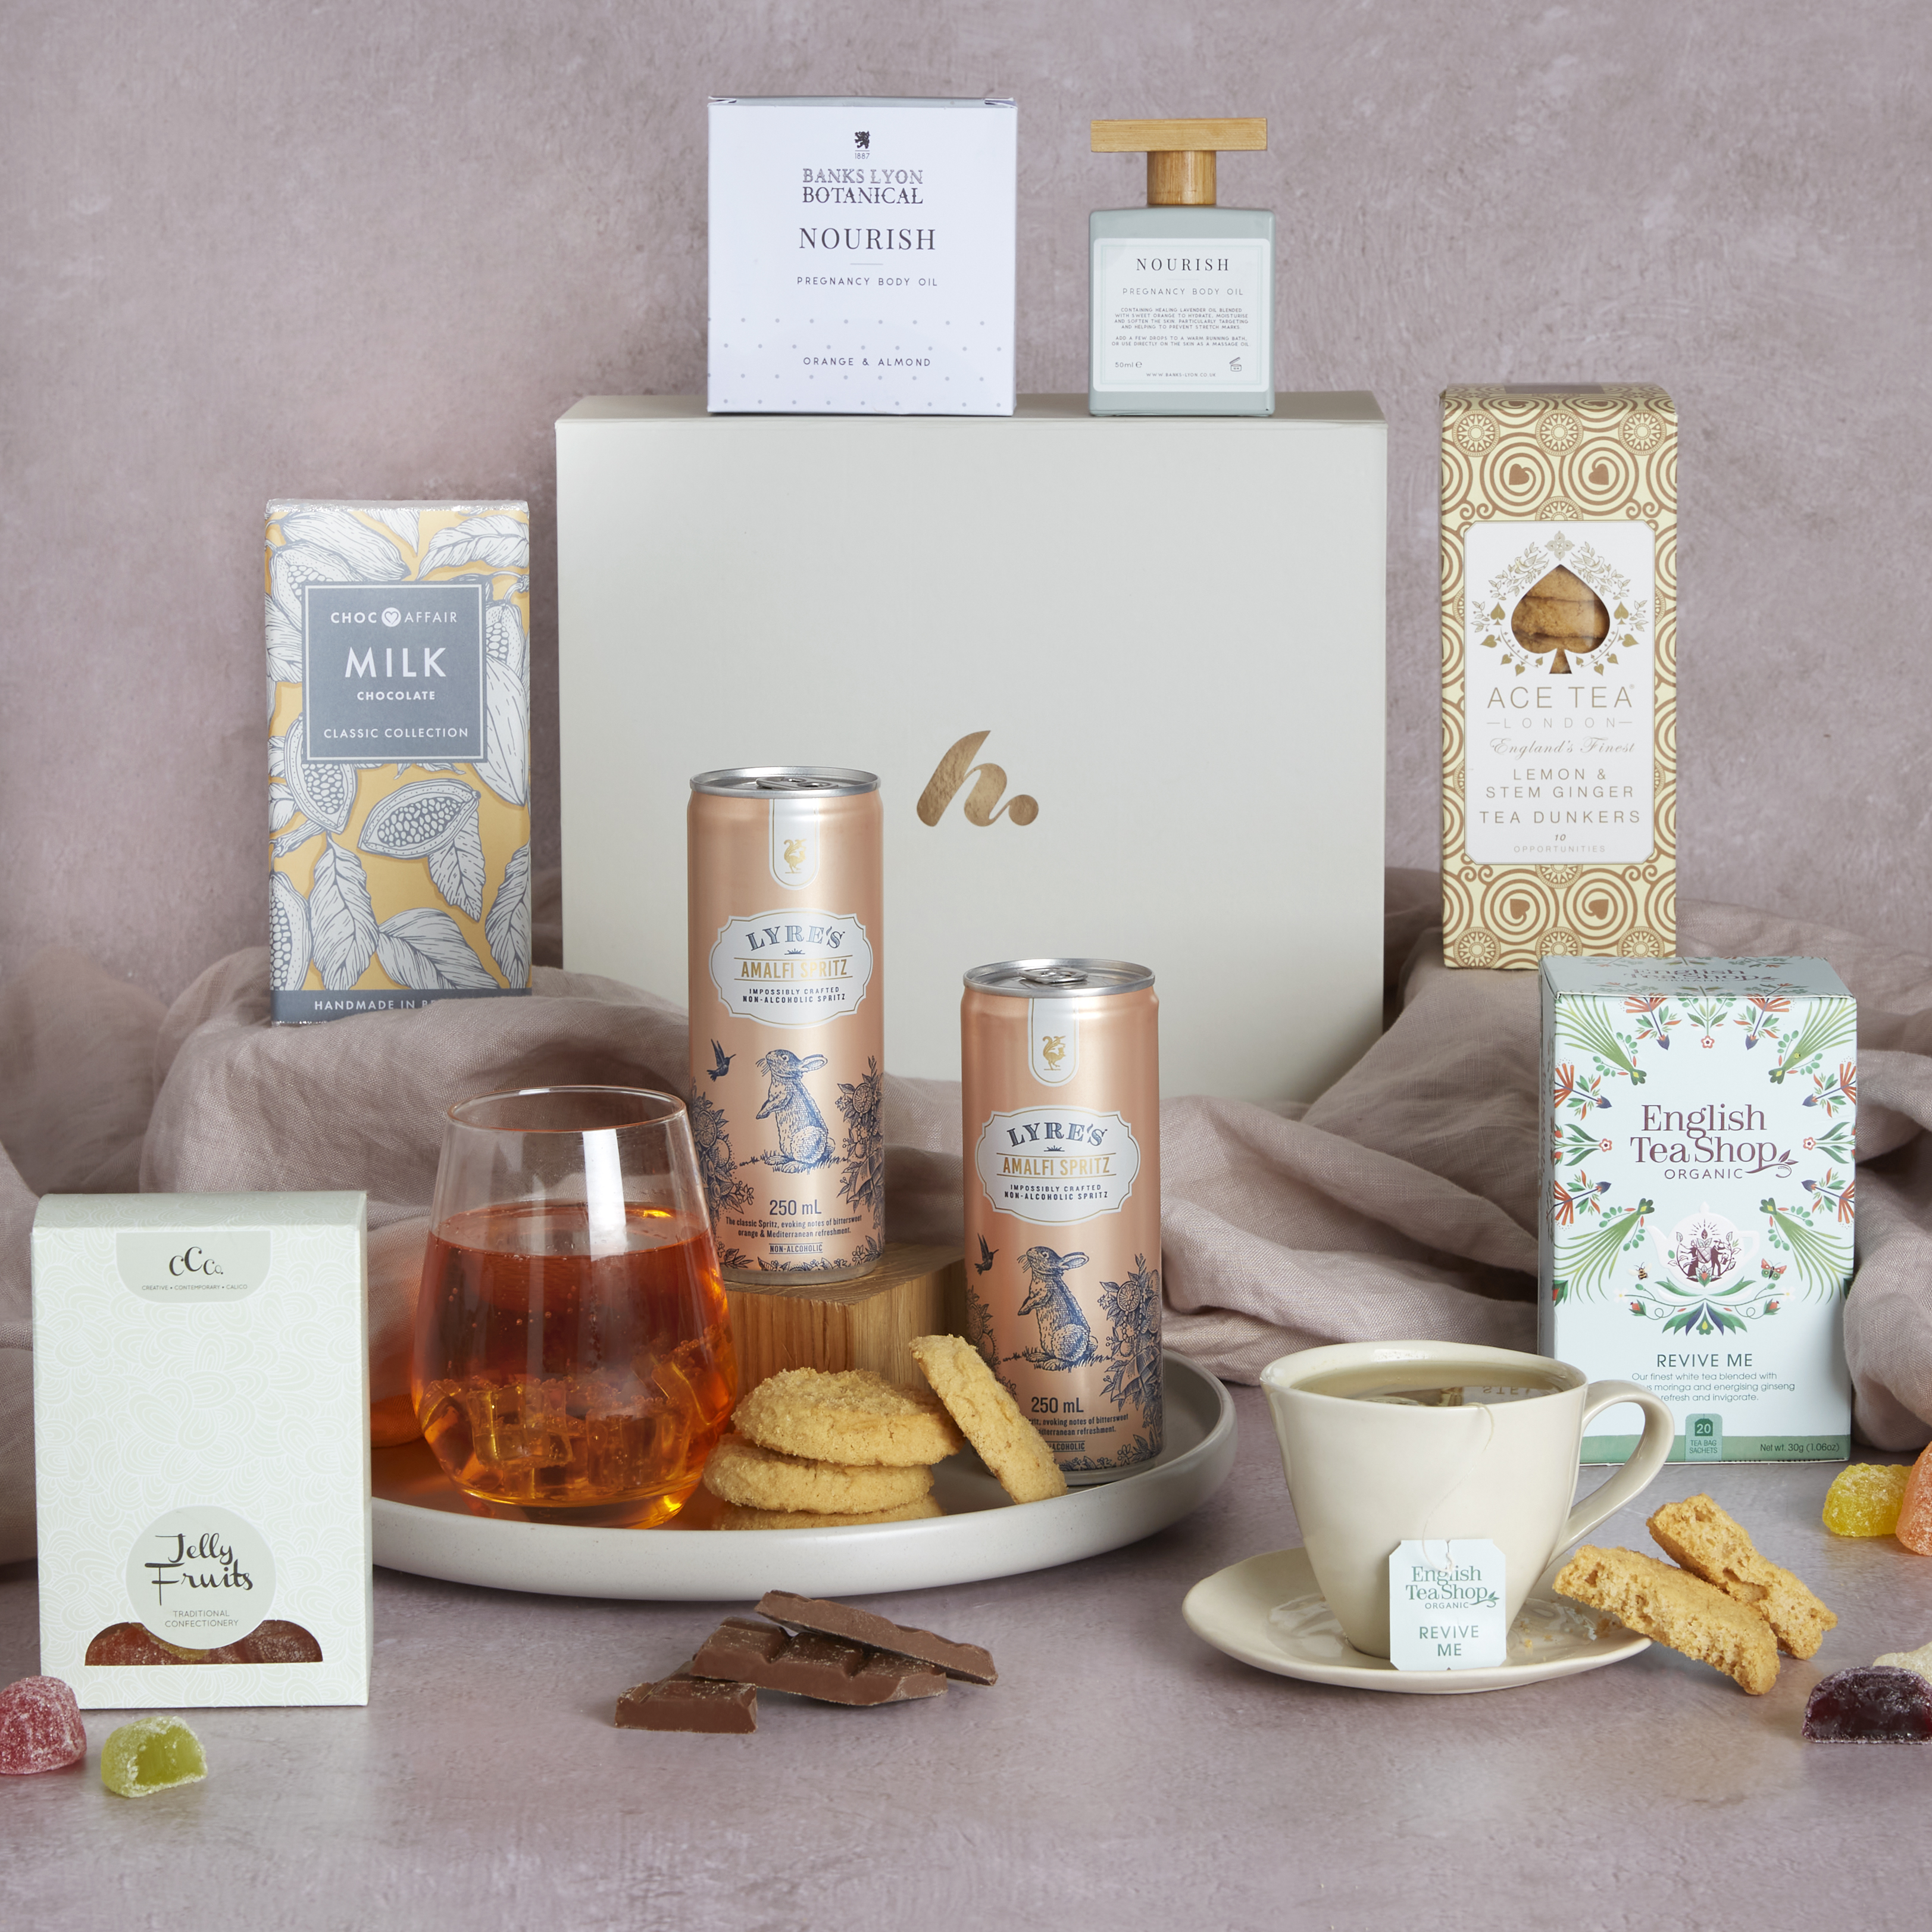 Mum-to-be pamper hamper with contents on display and signature gift box